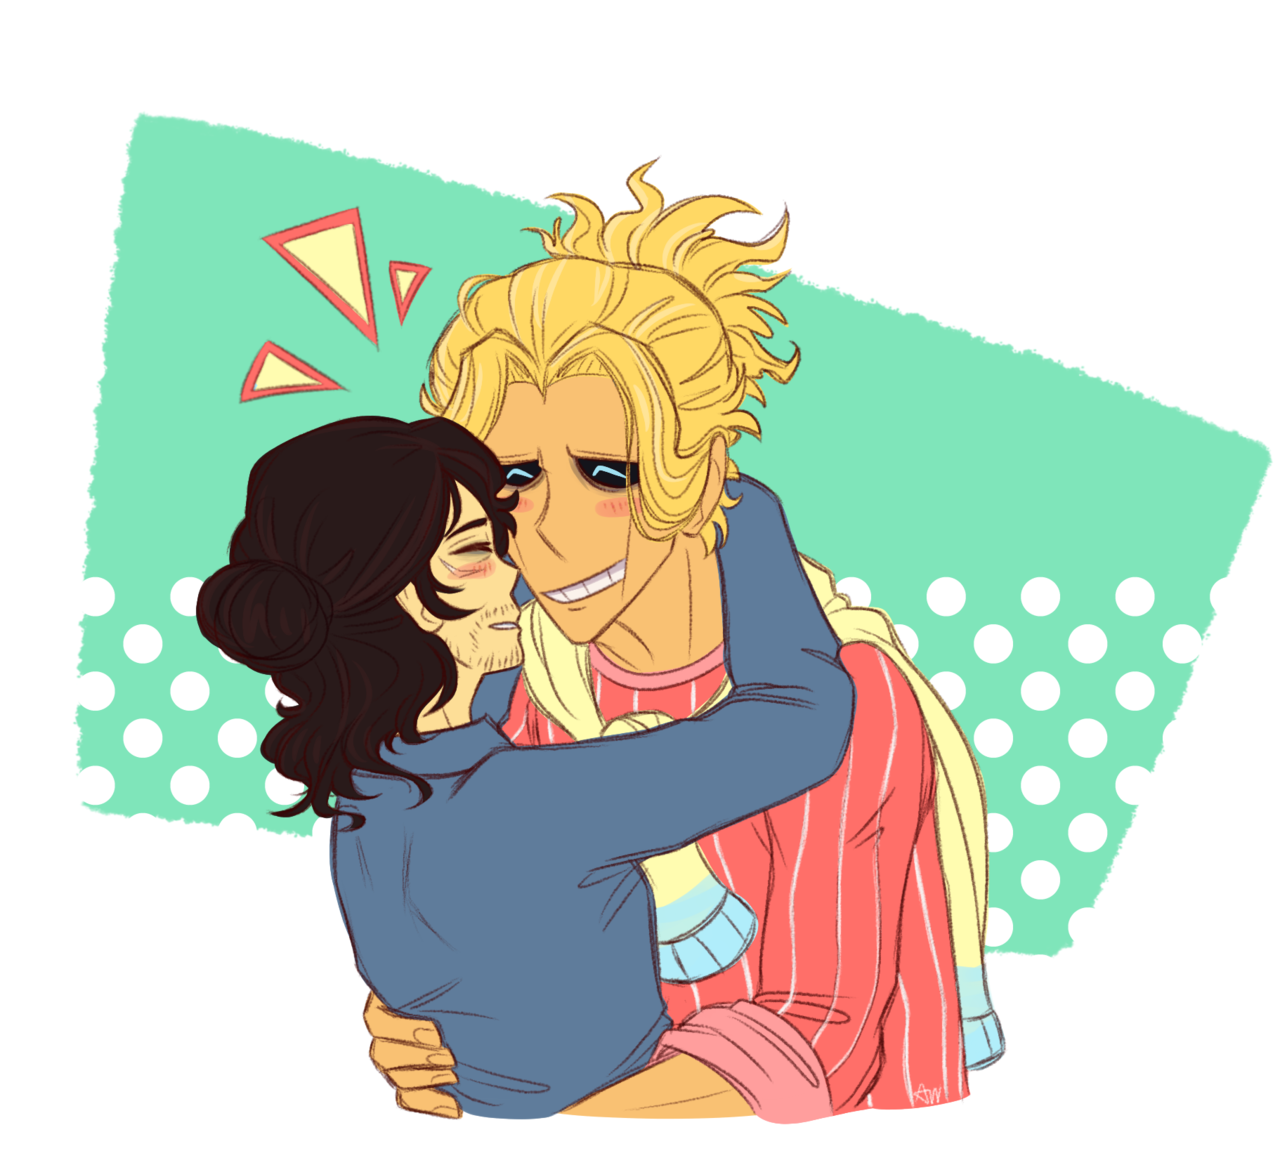 a-substantial-trash-pile: Hey, I’m working on another Erasermight drawing right